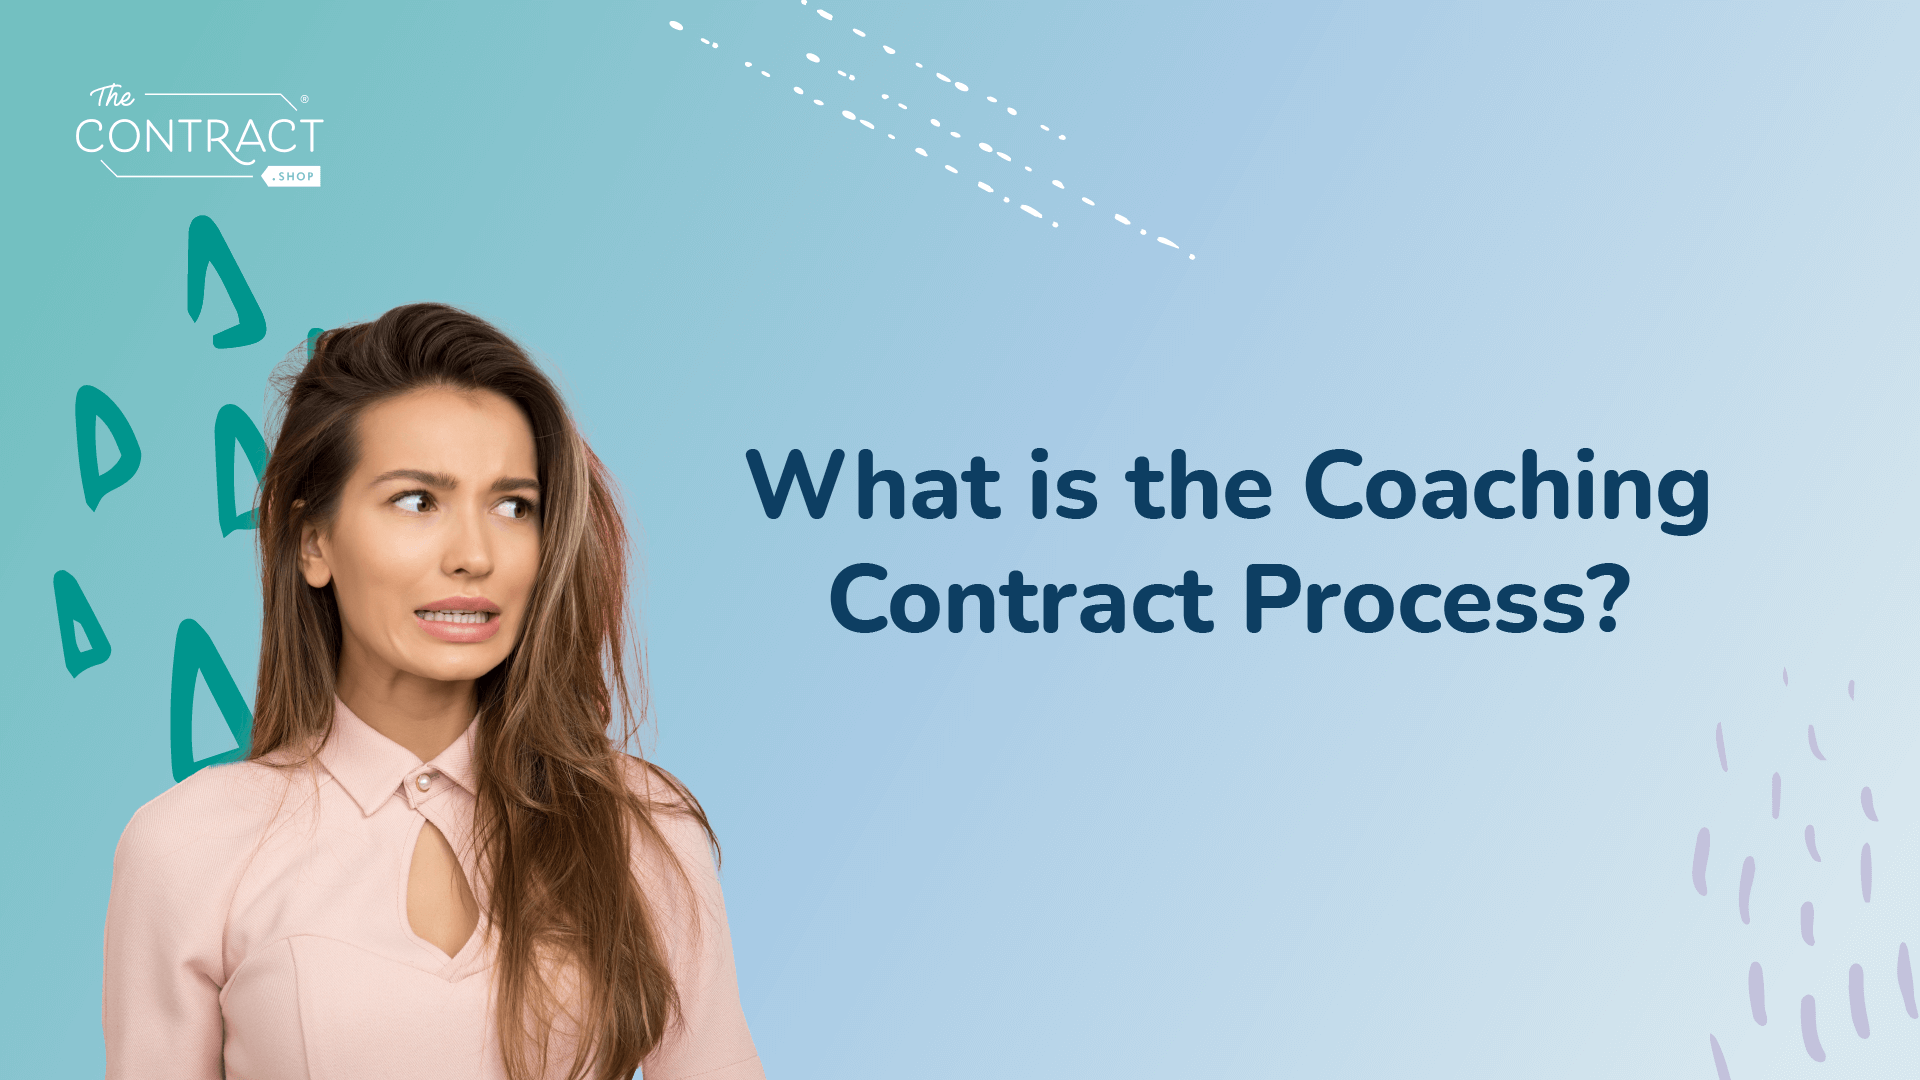 What is the Coaching Contract Process?